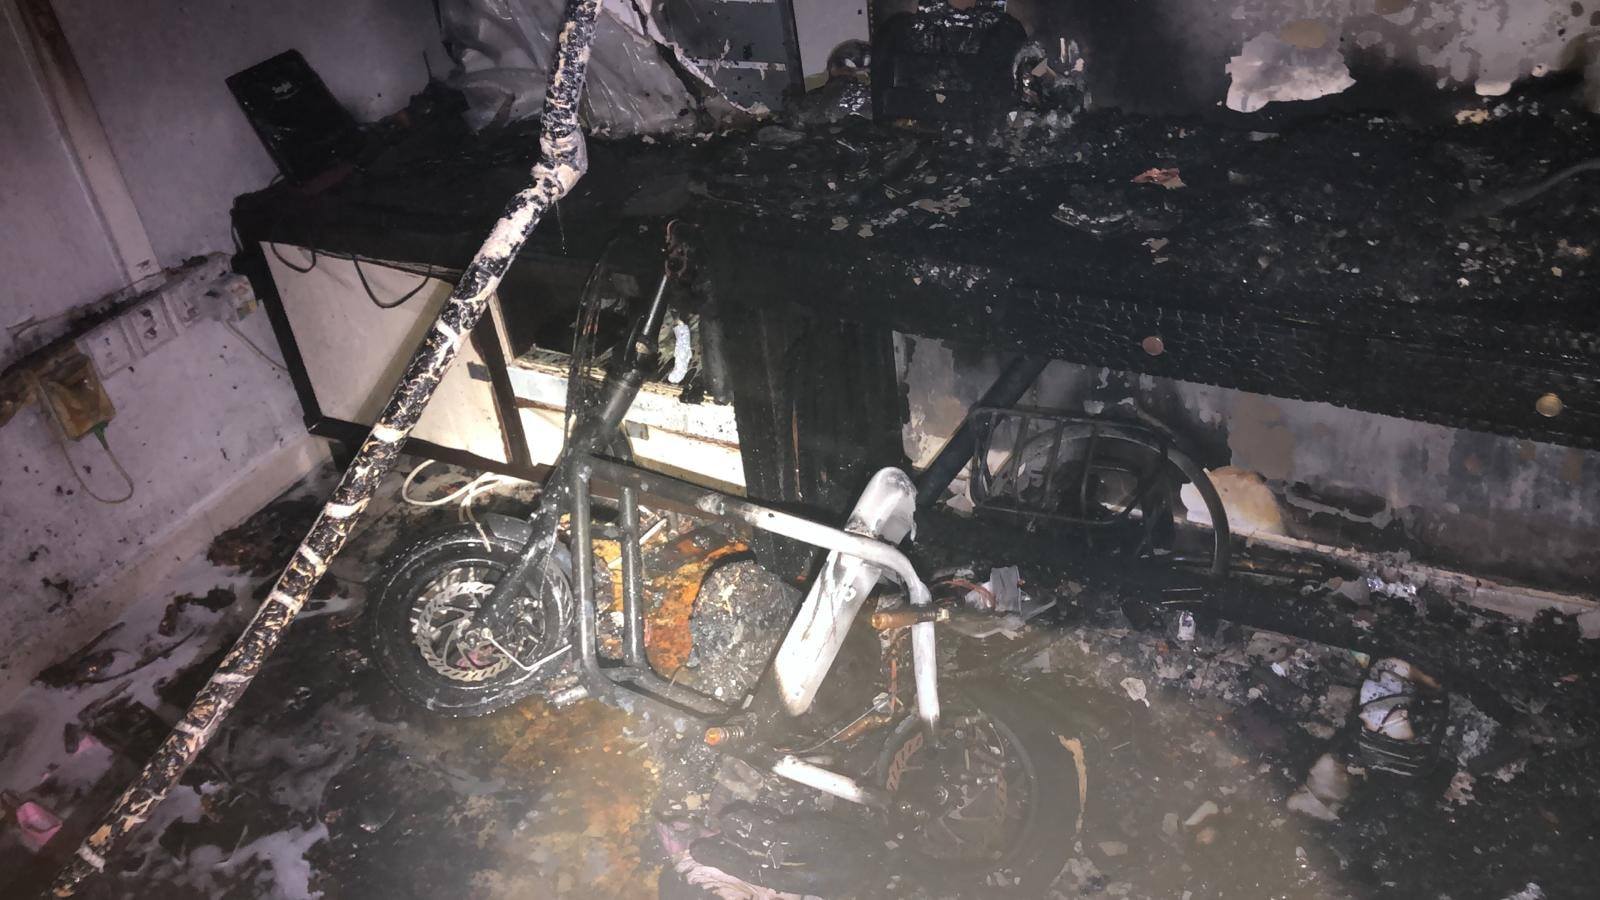 An e-scooter found in the aftermath of a fire at Sembawang flat. (Photo: SCDF/fb)